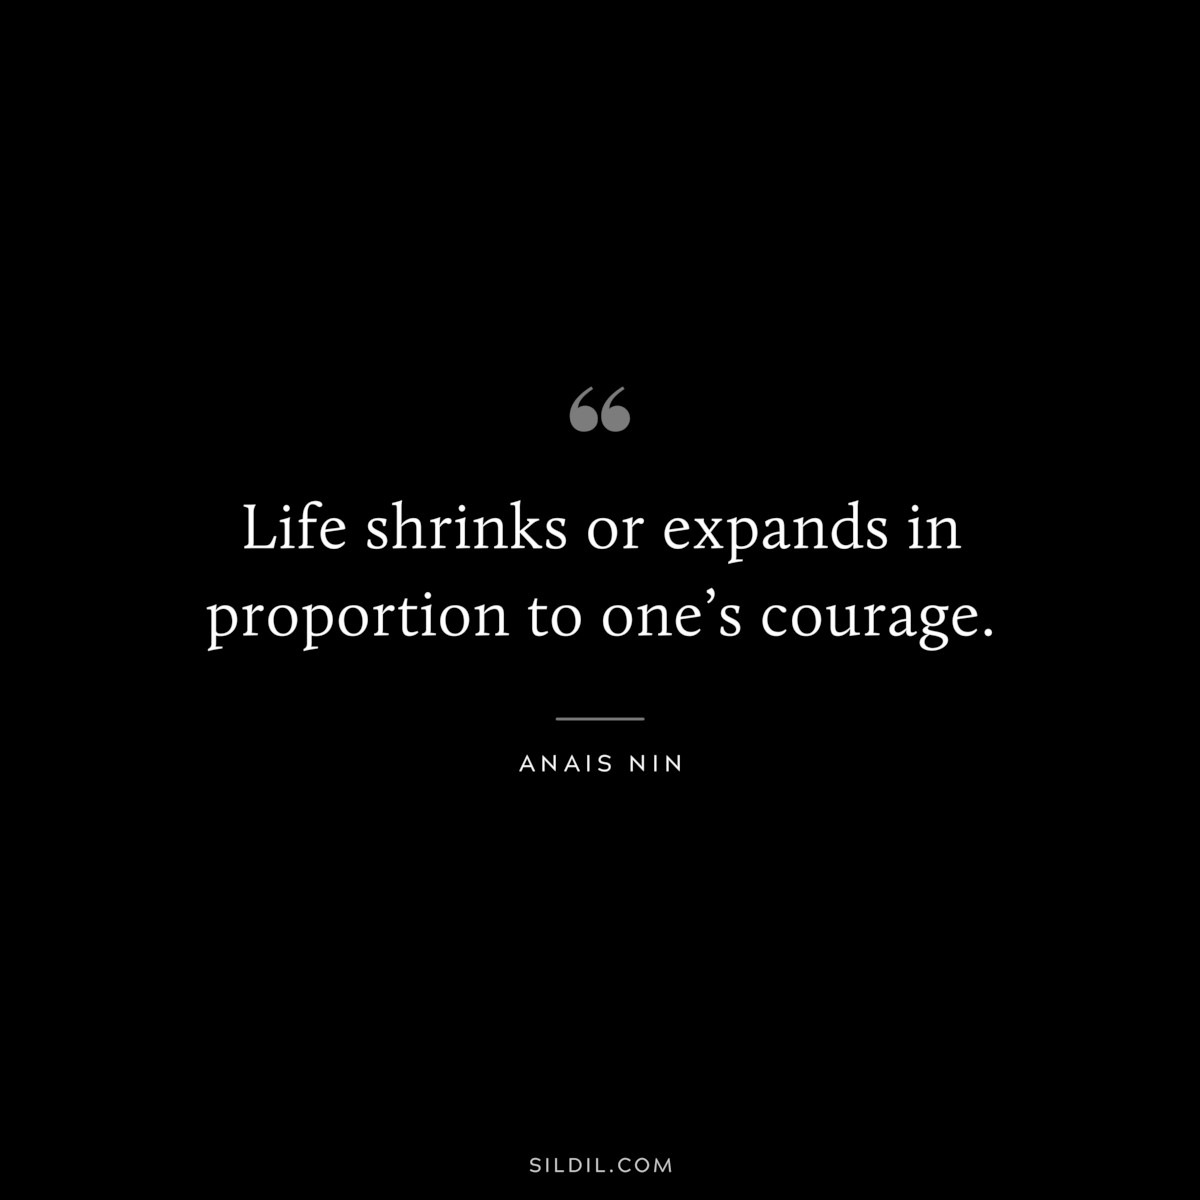 Life shrinks or expands in proportion to one’s courage. ― Anais Nin